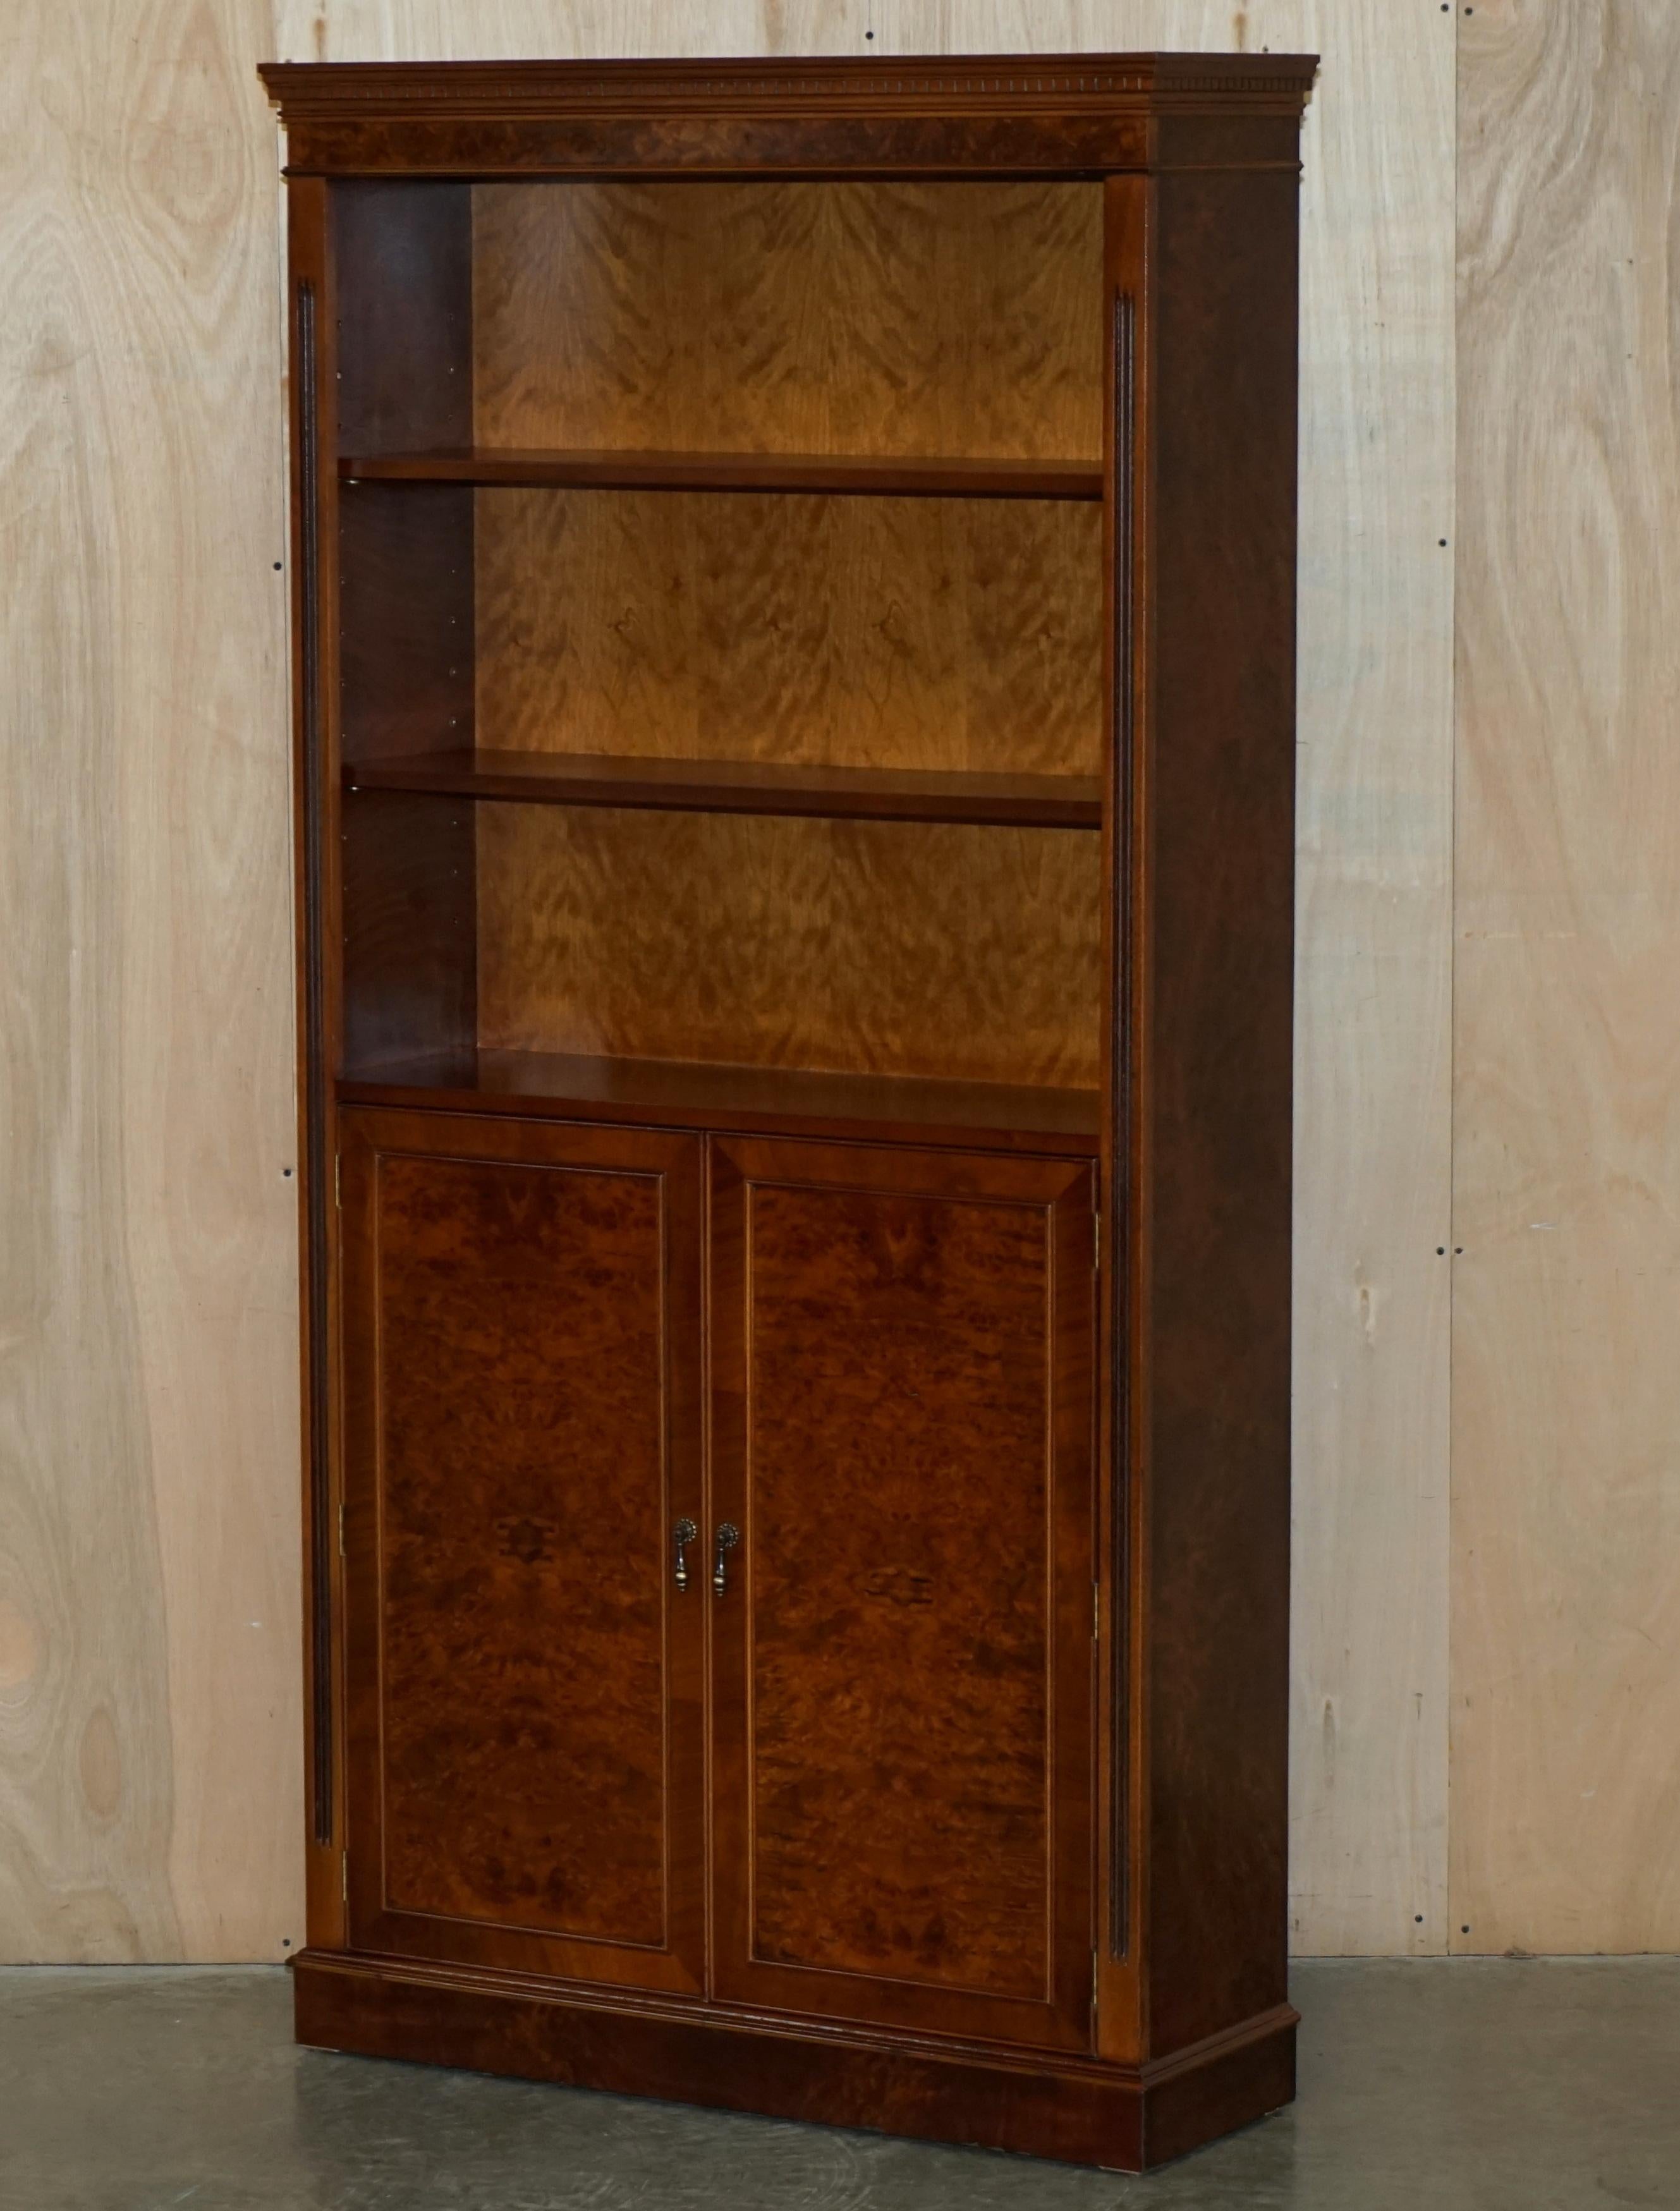 We are delighted to offer for sale this lovely pair of stunning vintage Burr & Burl Walnut open library bookcases with cupboard bases

A very good looking well made and decorative pair, it is very rare to find these bookcases in Burr walnut, the